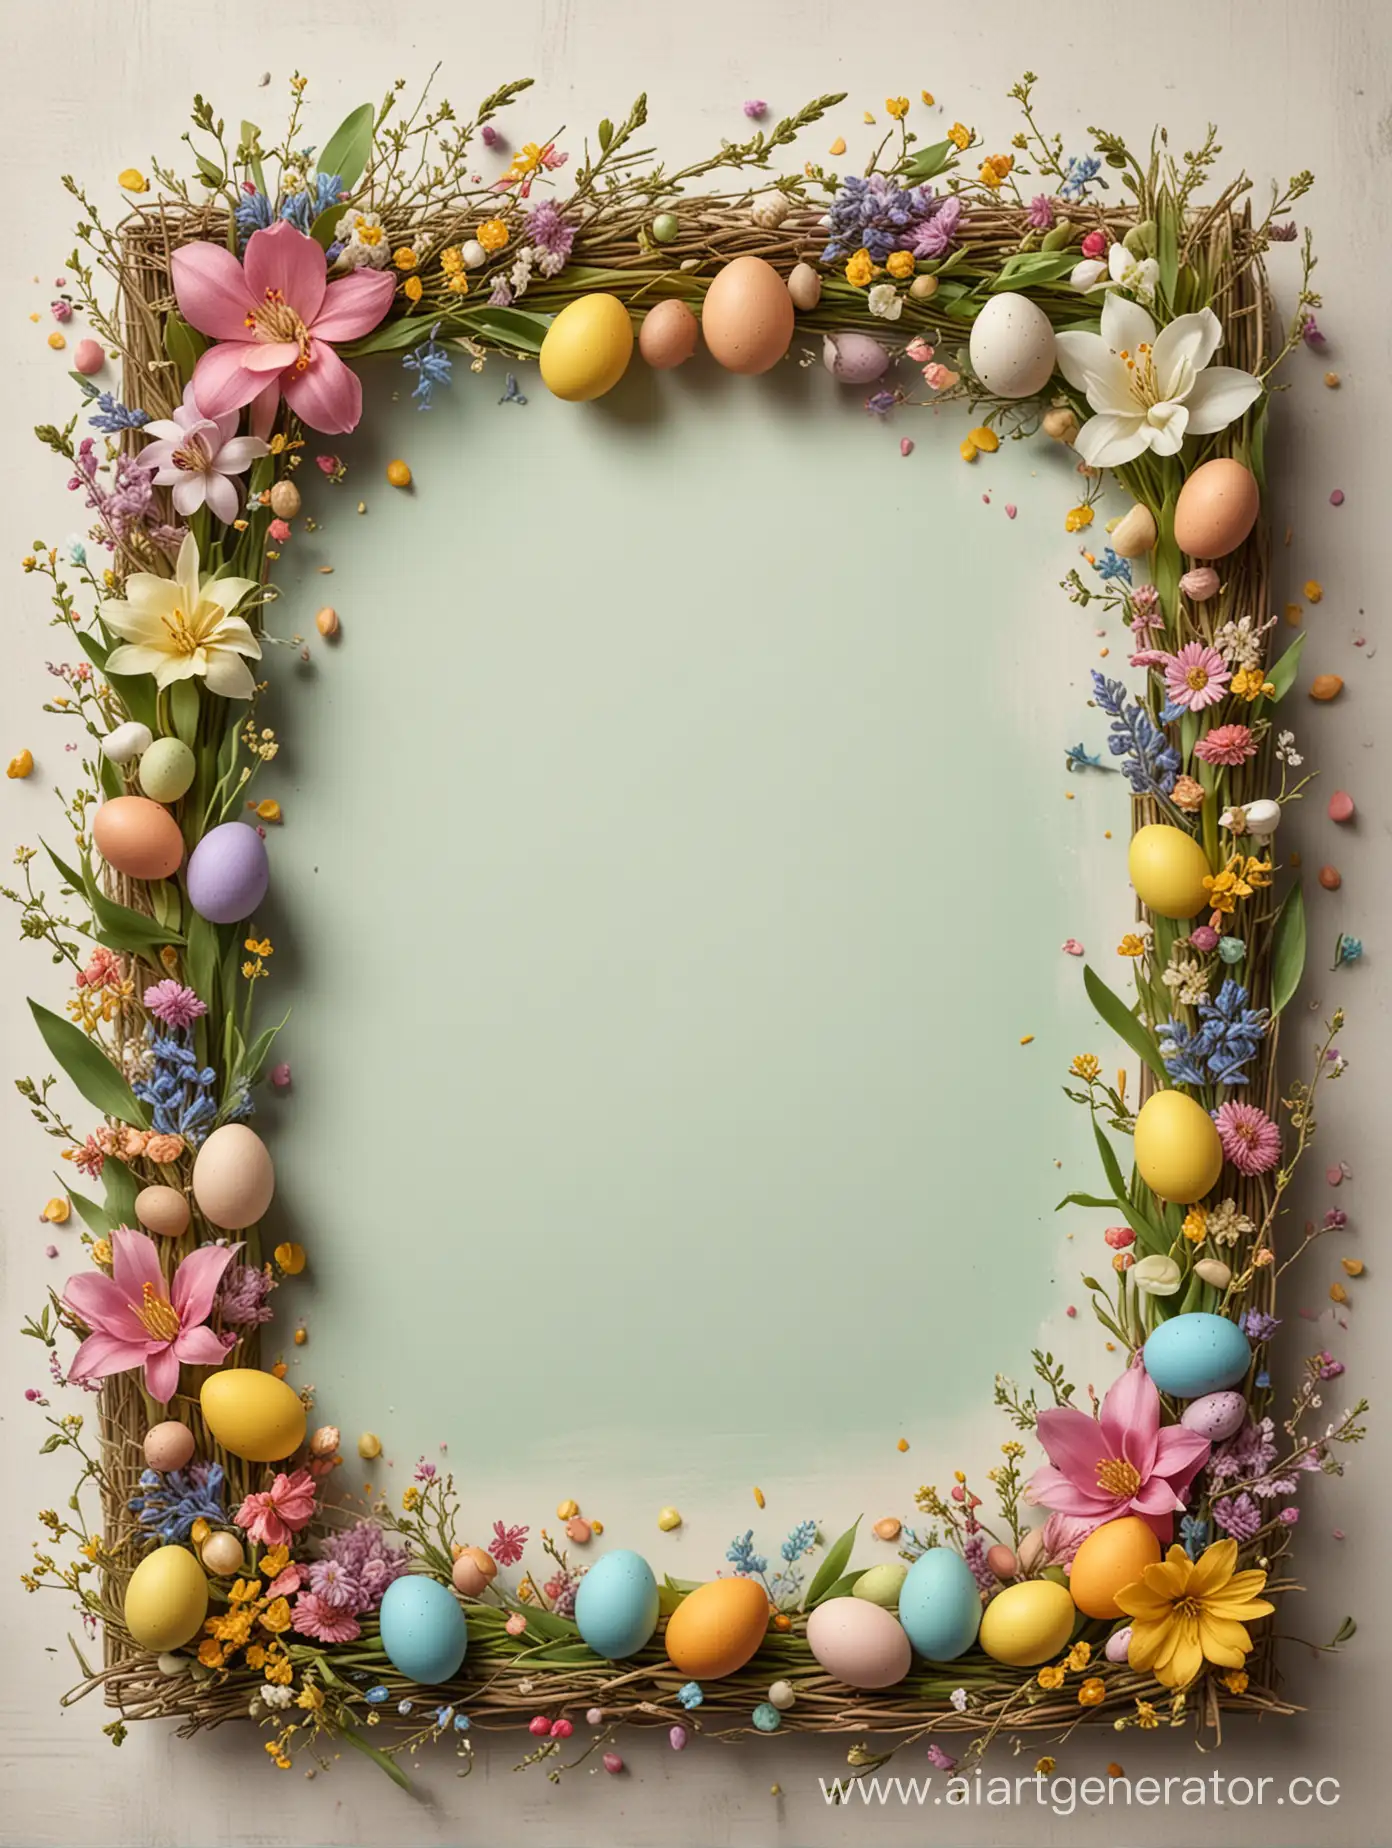 Bright-Spring-Symbolic-Objects-Frame-for-Orthodox-Easter-Poster